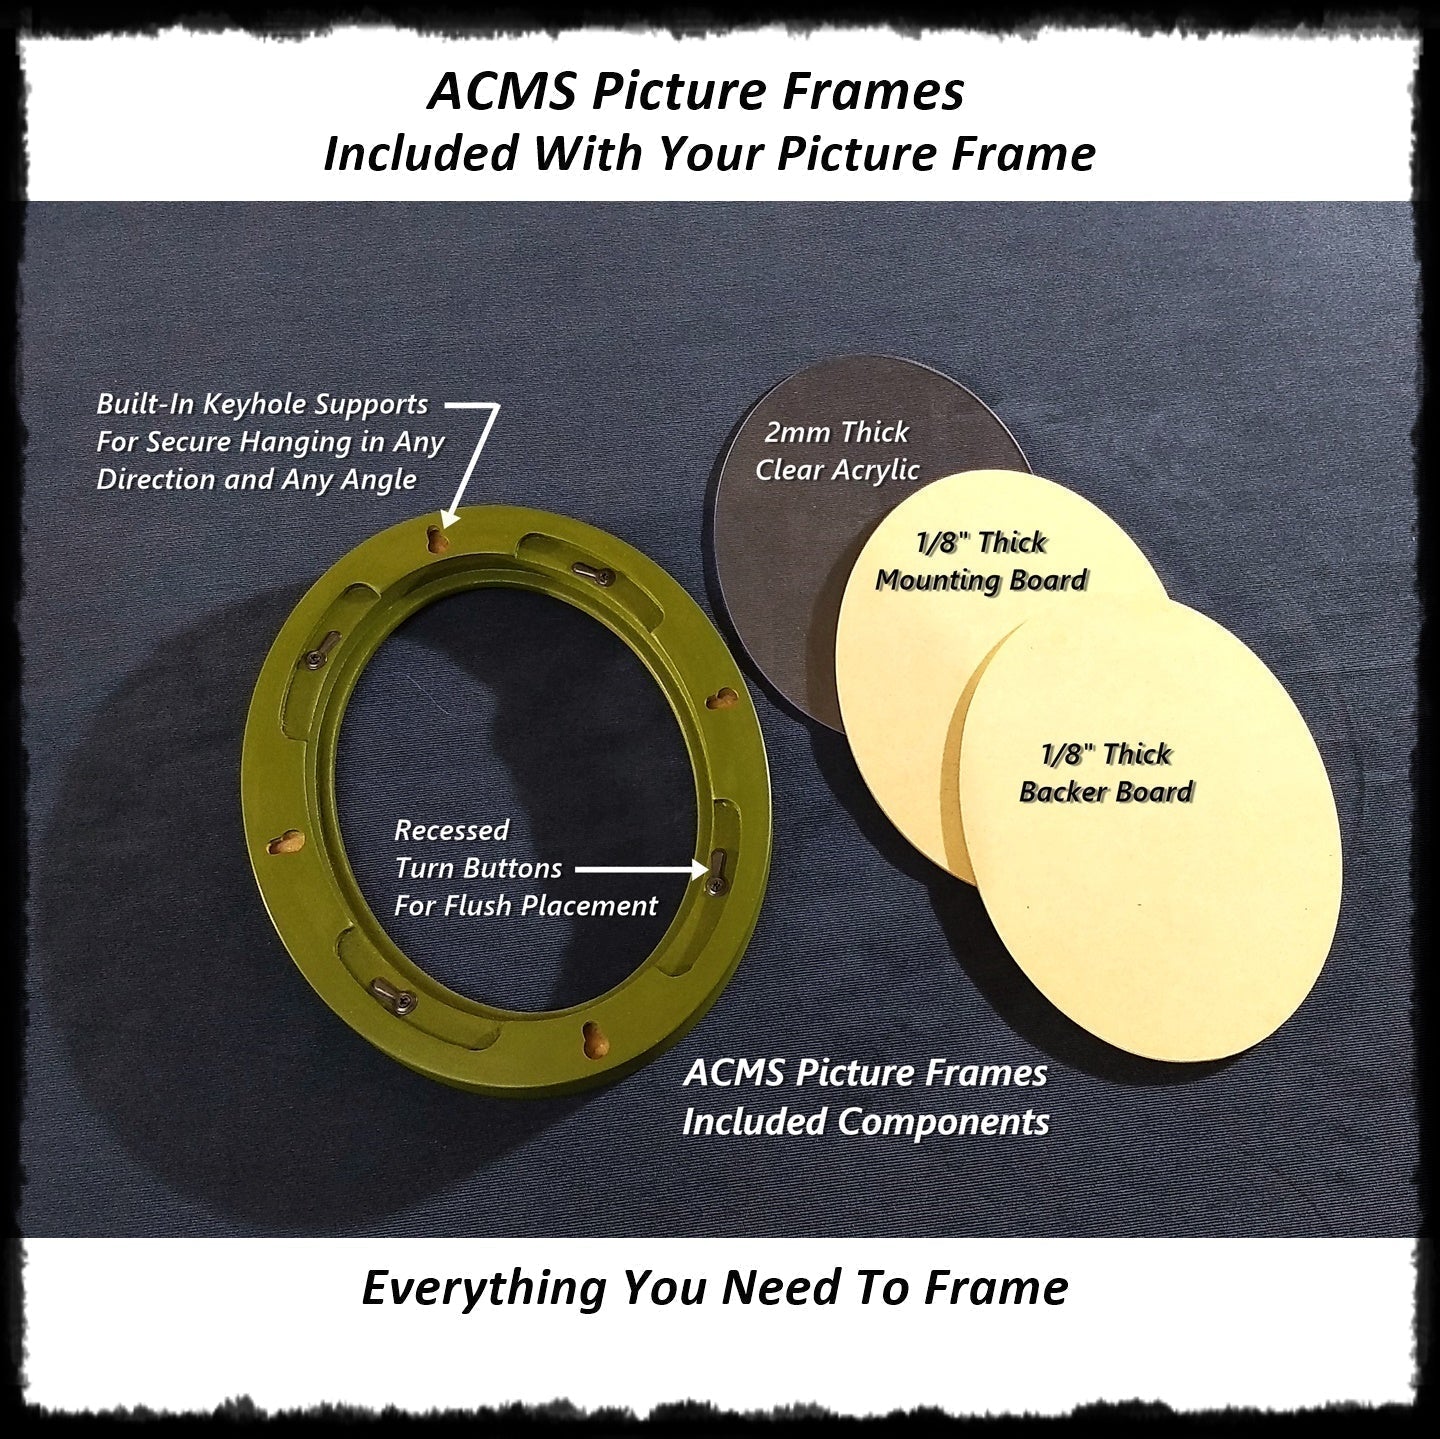 Oval Picture Frame - Double Cove Profile - 1.50" Frame Width